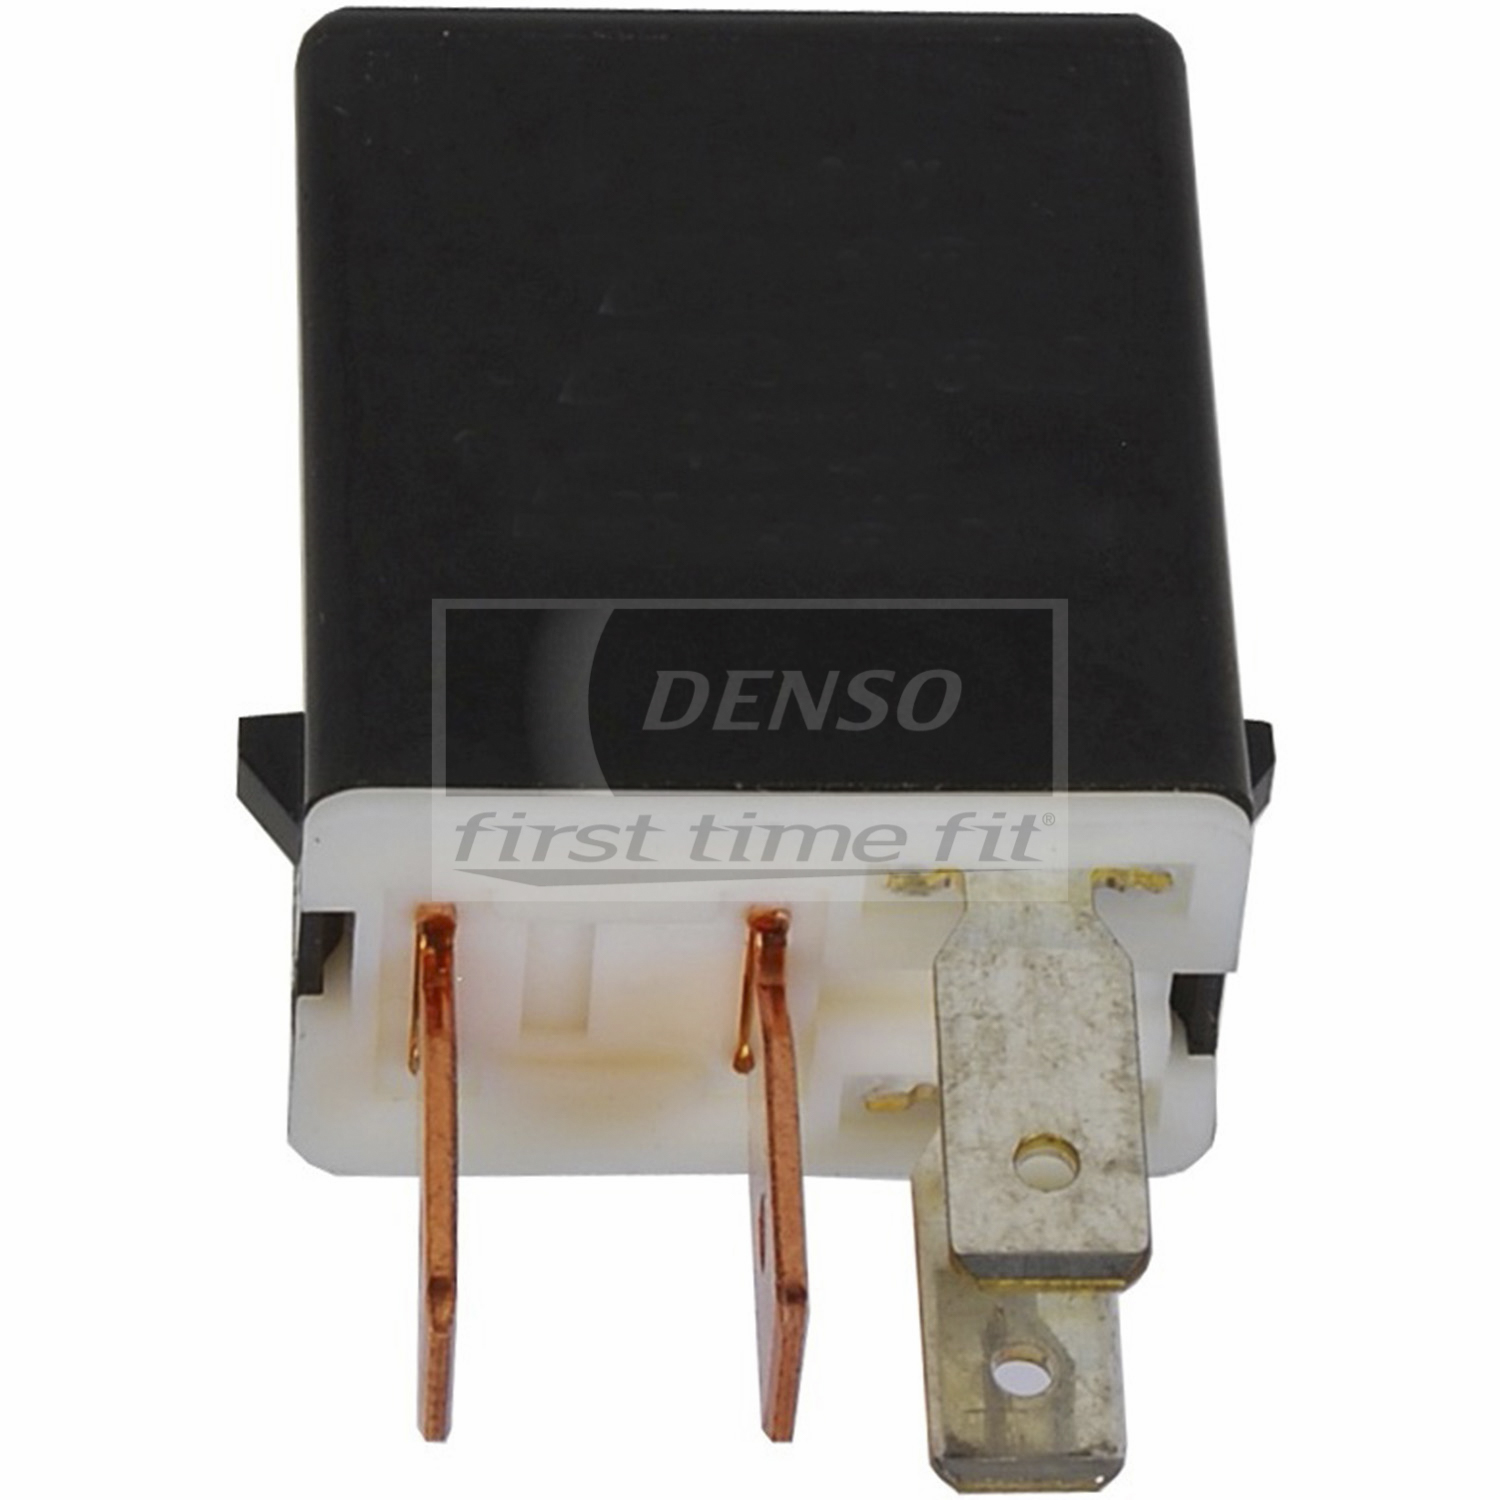 Show details for DENSO Auto Parts 5670001 First Time Fit Relay